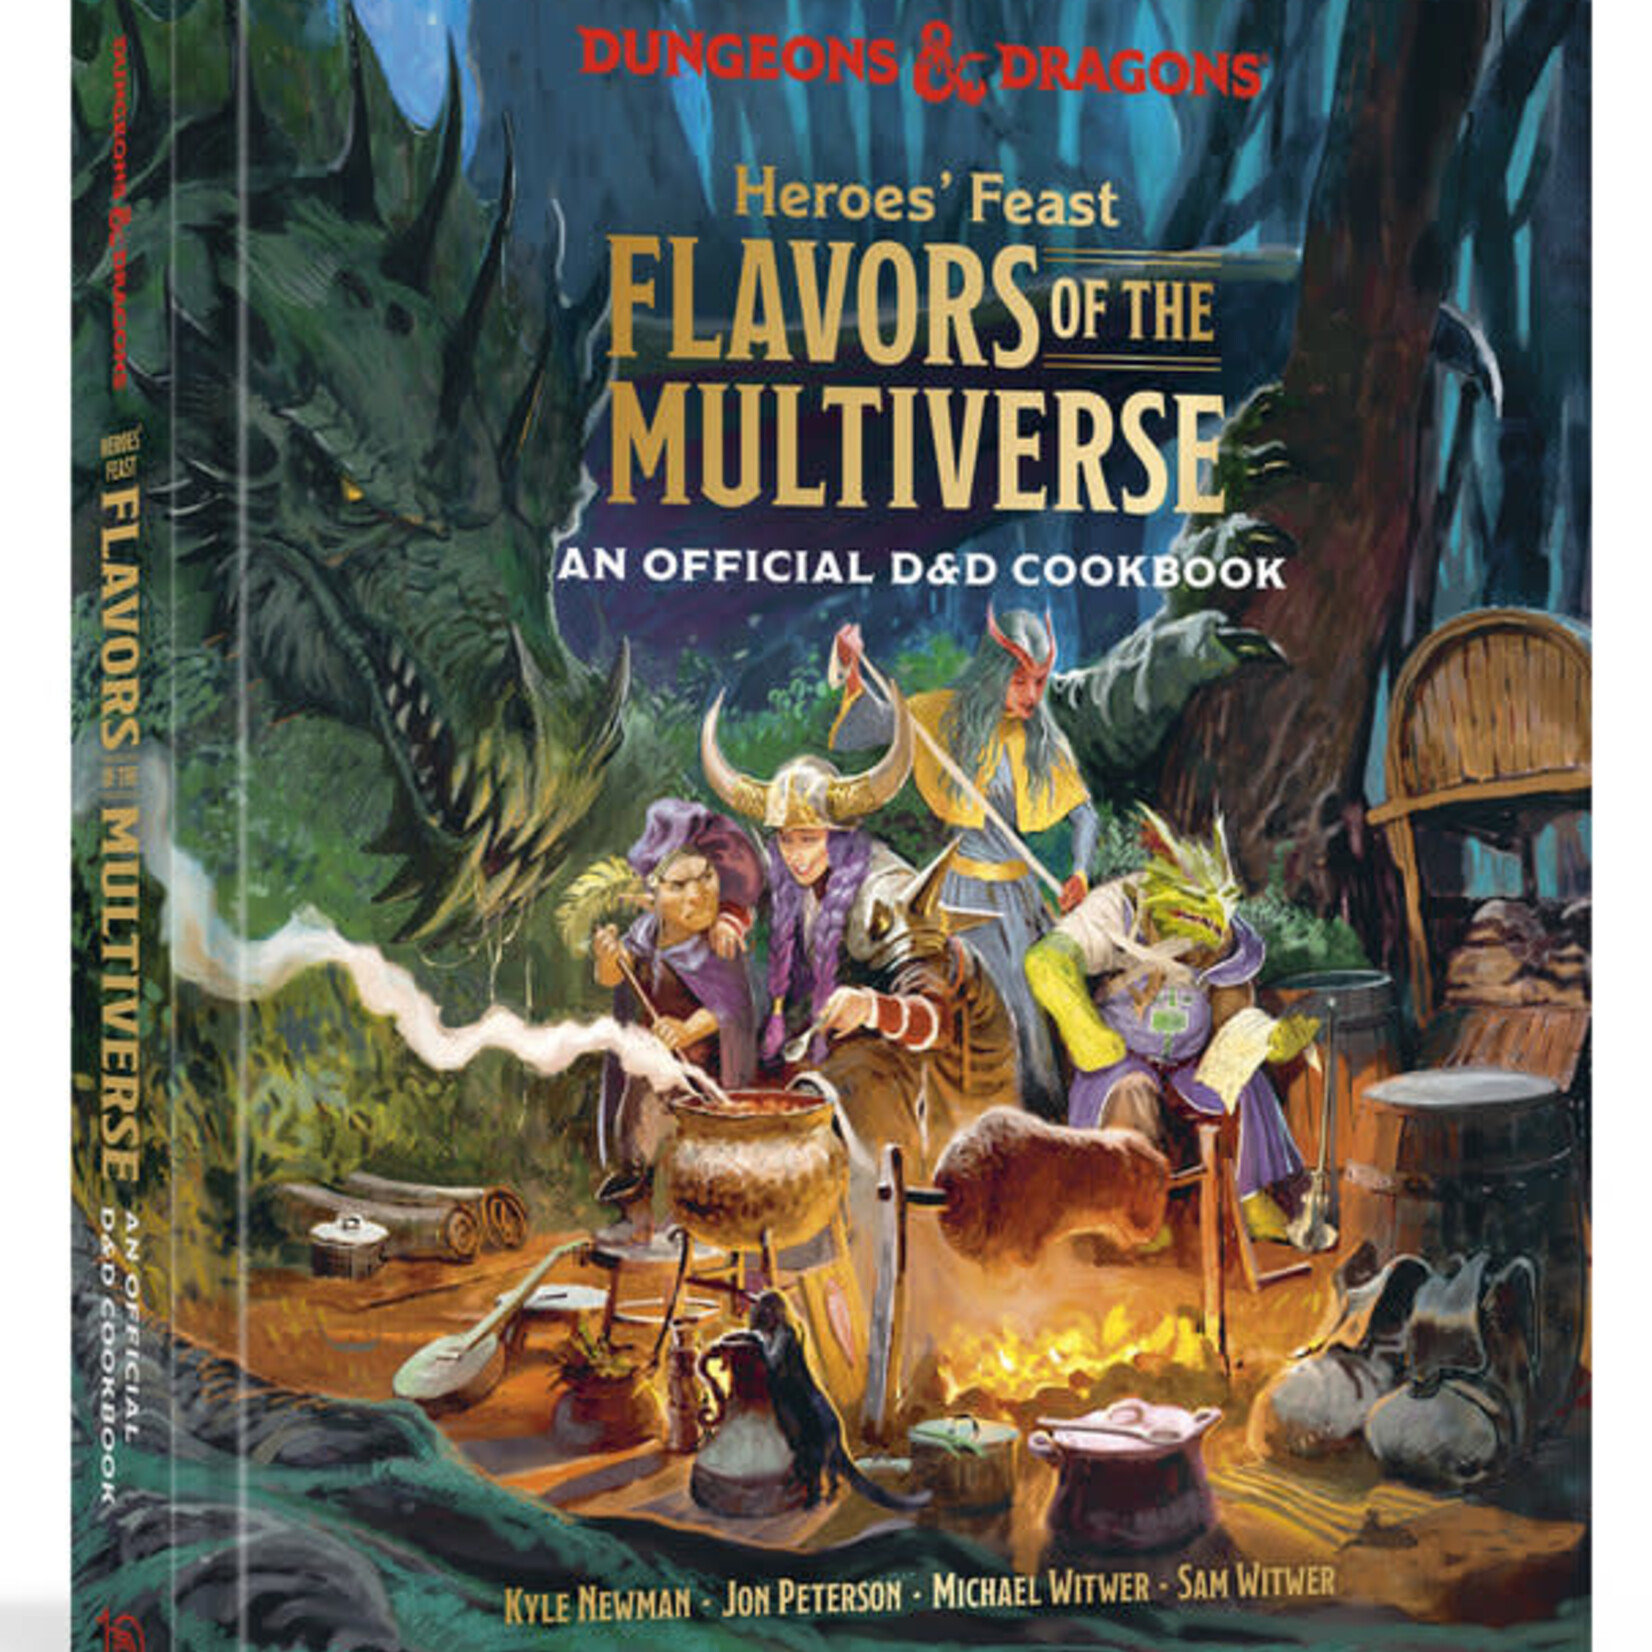 Penguin Random House Publishing Dungeons and Dragons Heroes' Feast Flavors of the Multiverse HC